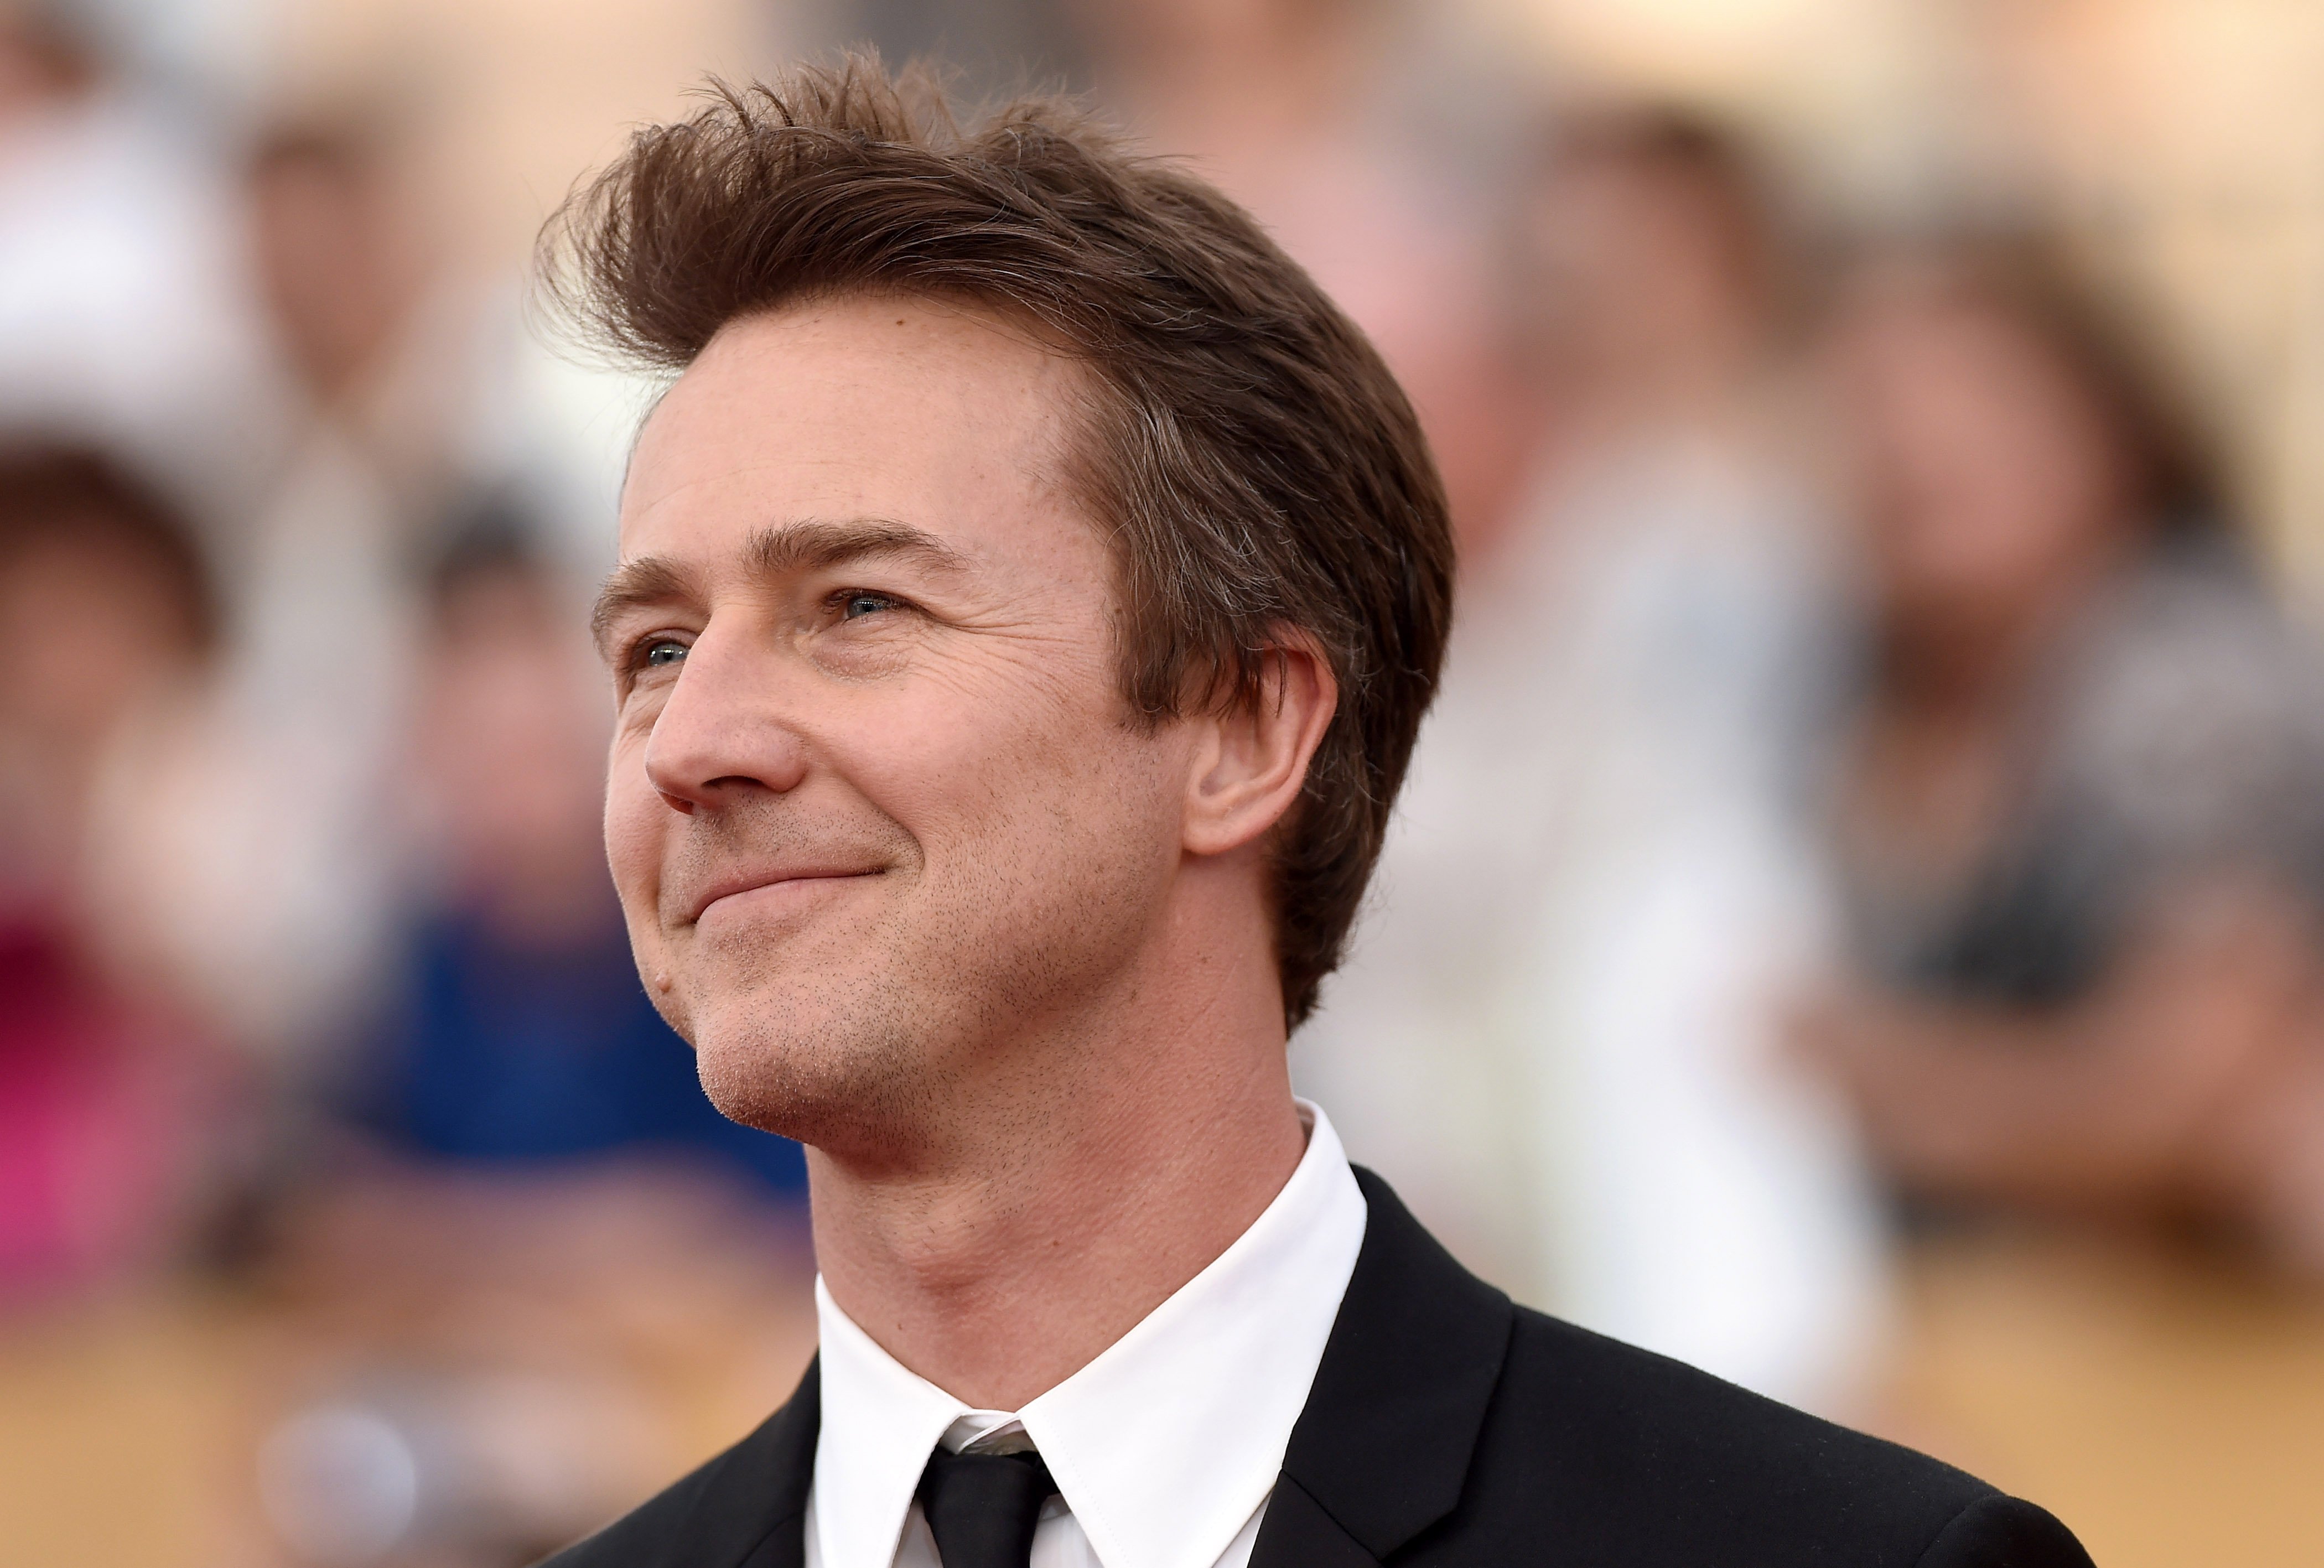 Edward Norton arrives at the 21st Annual Screen Actors Guild Awards at The Shrine Auditorium on January 25, 2015